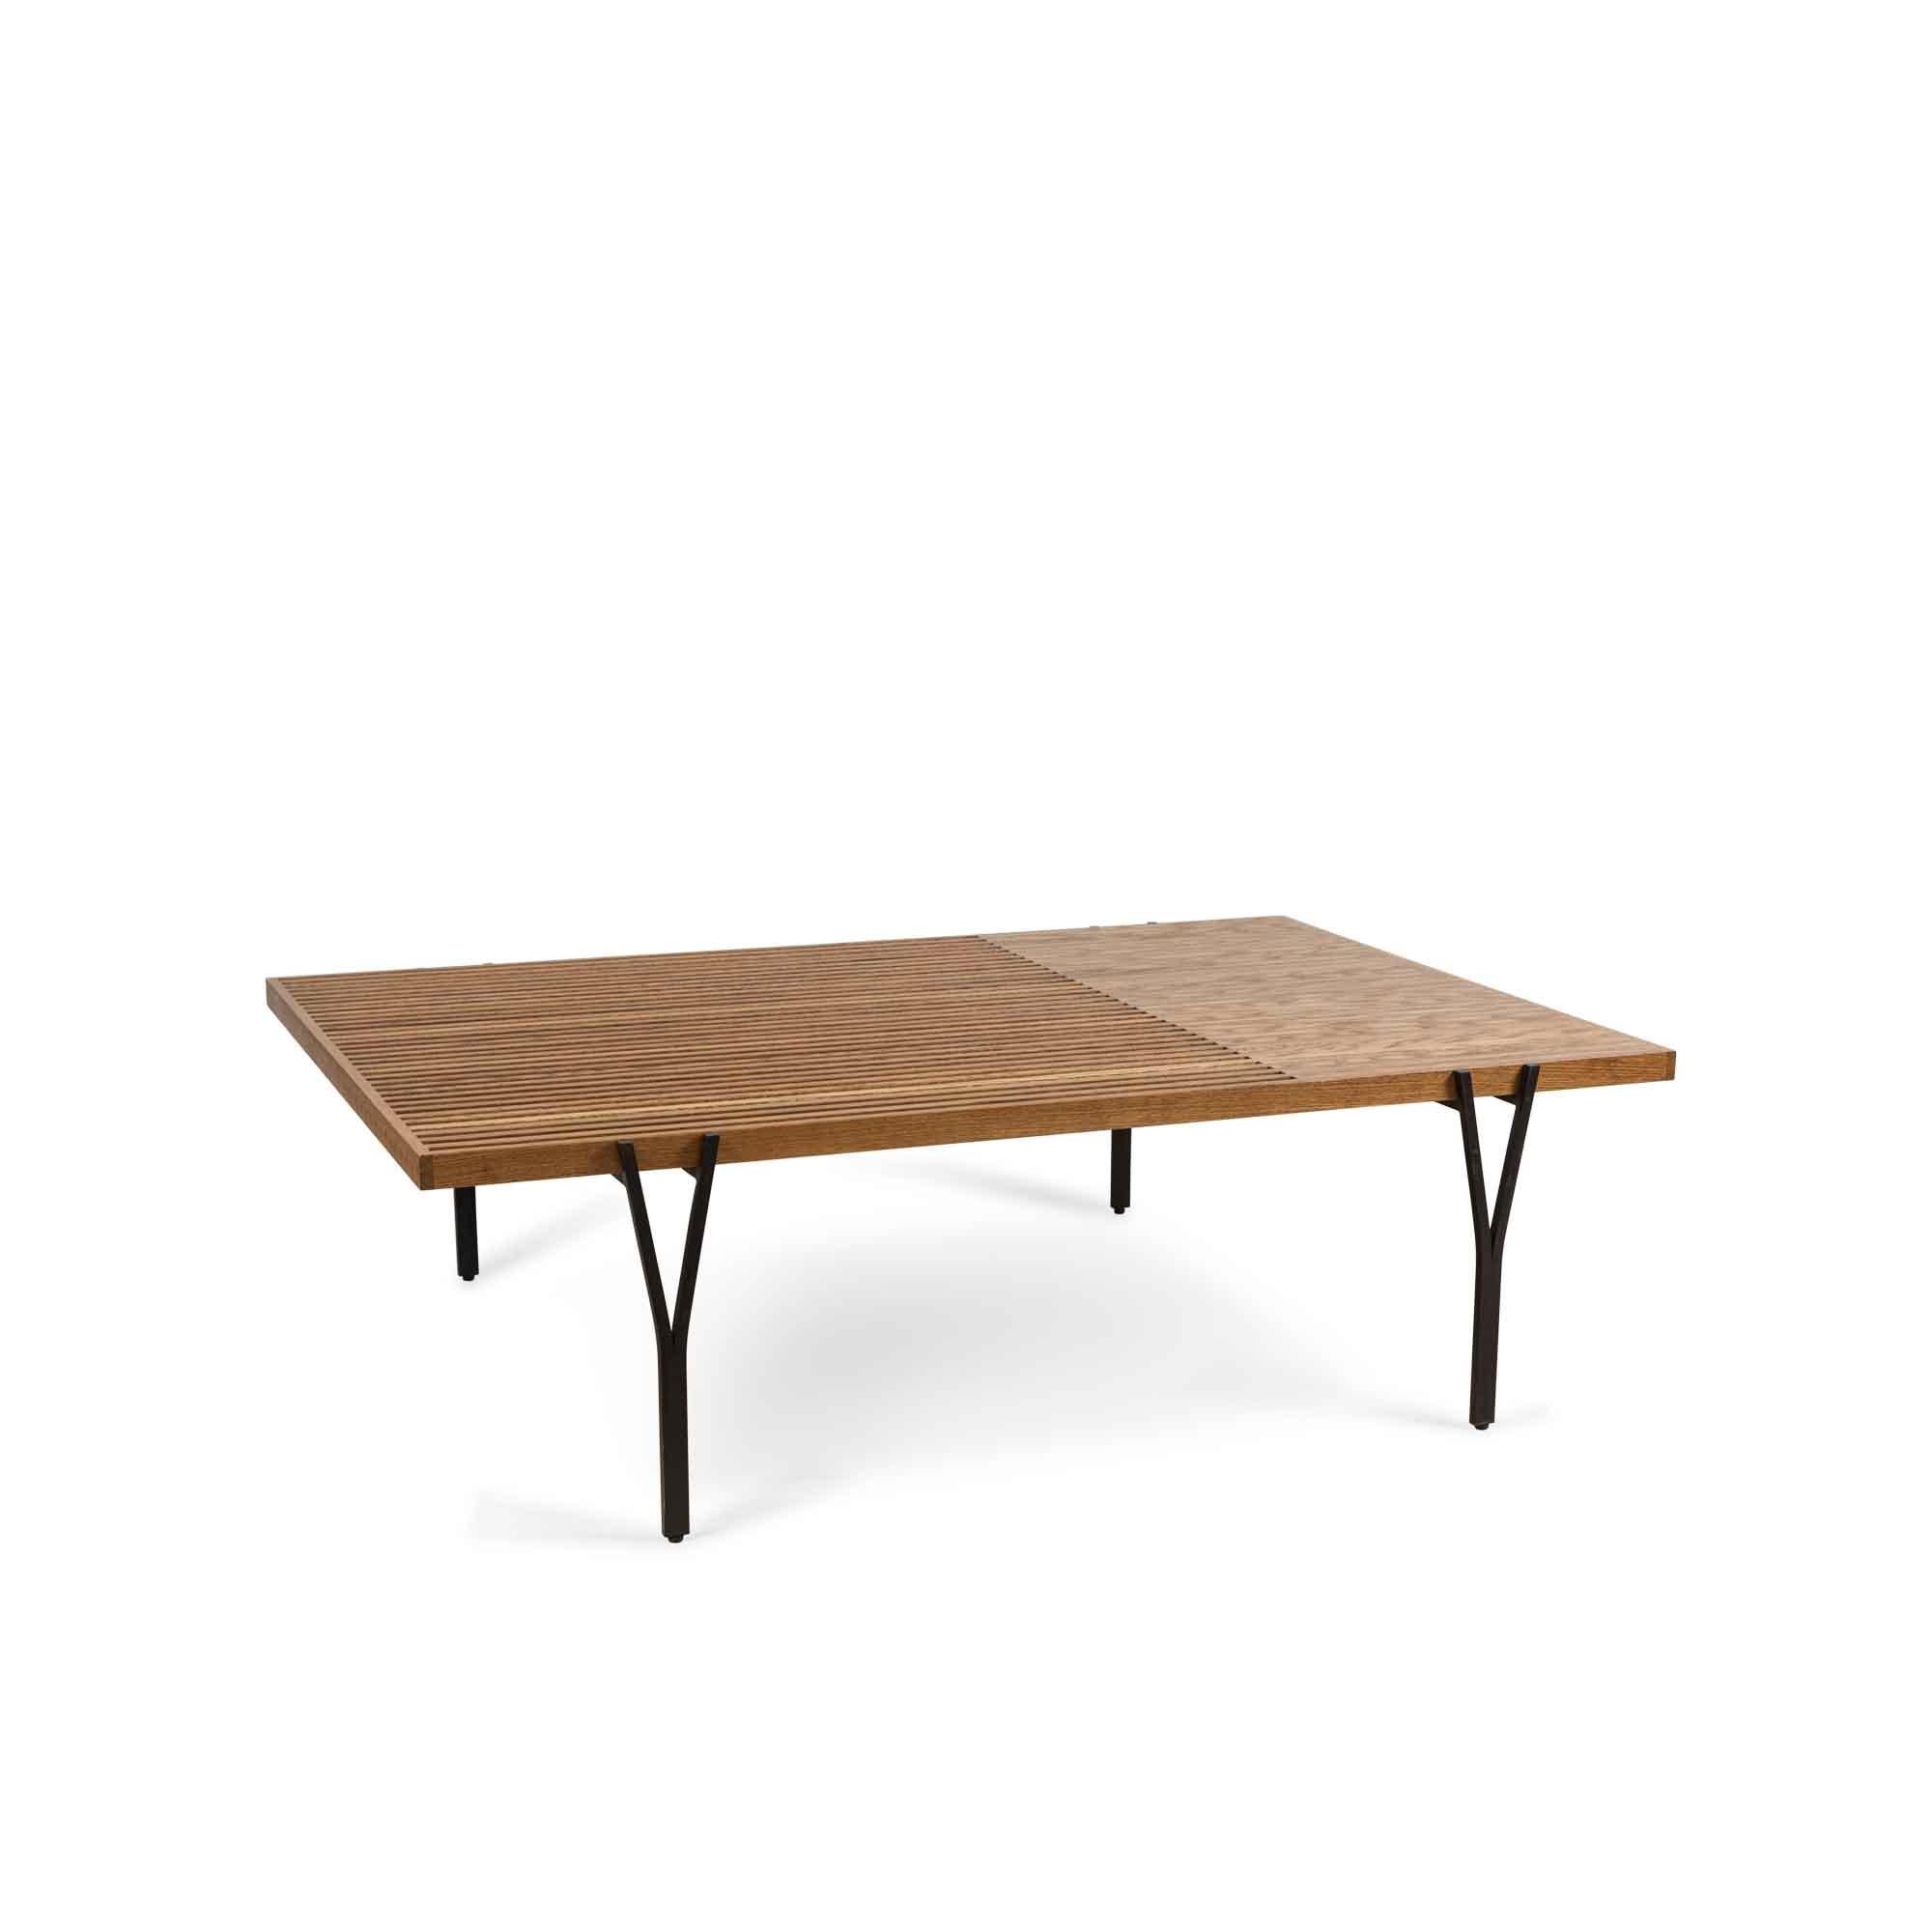 Oak Y-leg coffee table by Lawson-Fenning. The Y-leg coffee tabletop is composed of solid American walnut or white oak strips. Both ends of the table have visible dowel joinery which adds to the handcrafted feel and the strength of the table. The